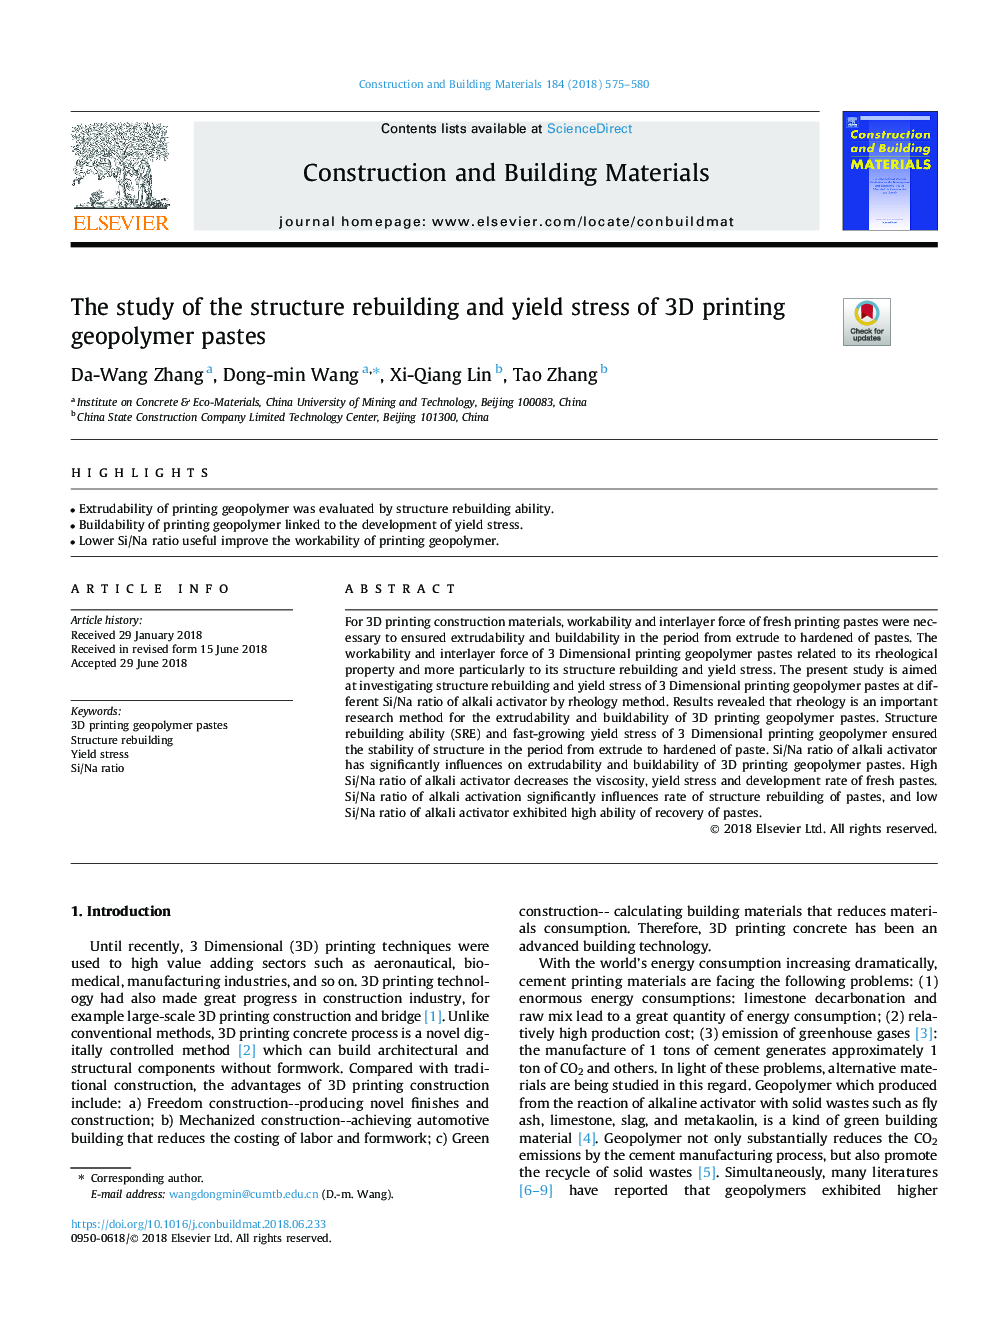 The study of the structure rebuilding and yield stress of 3D printing geopolymer pastes